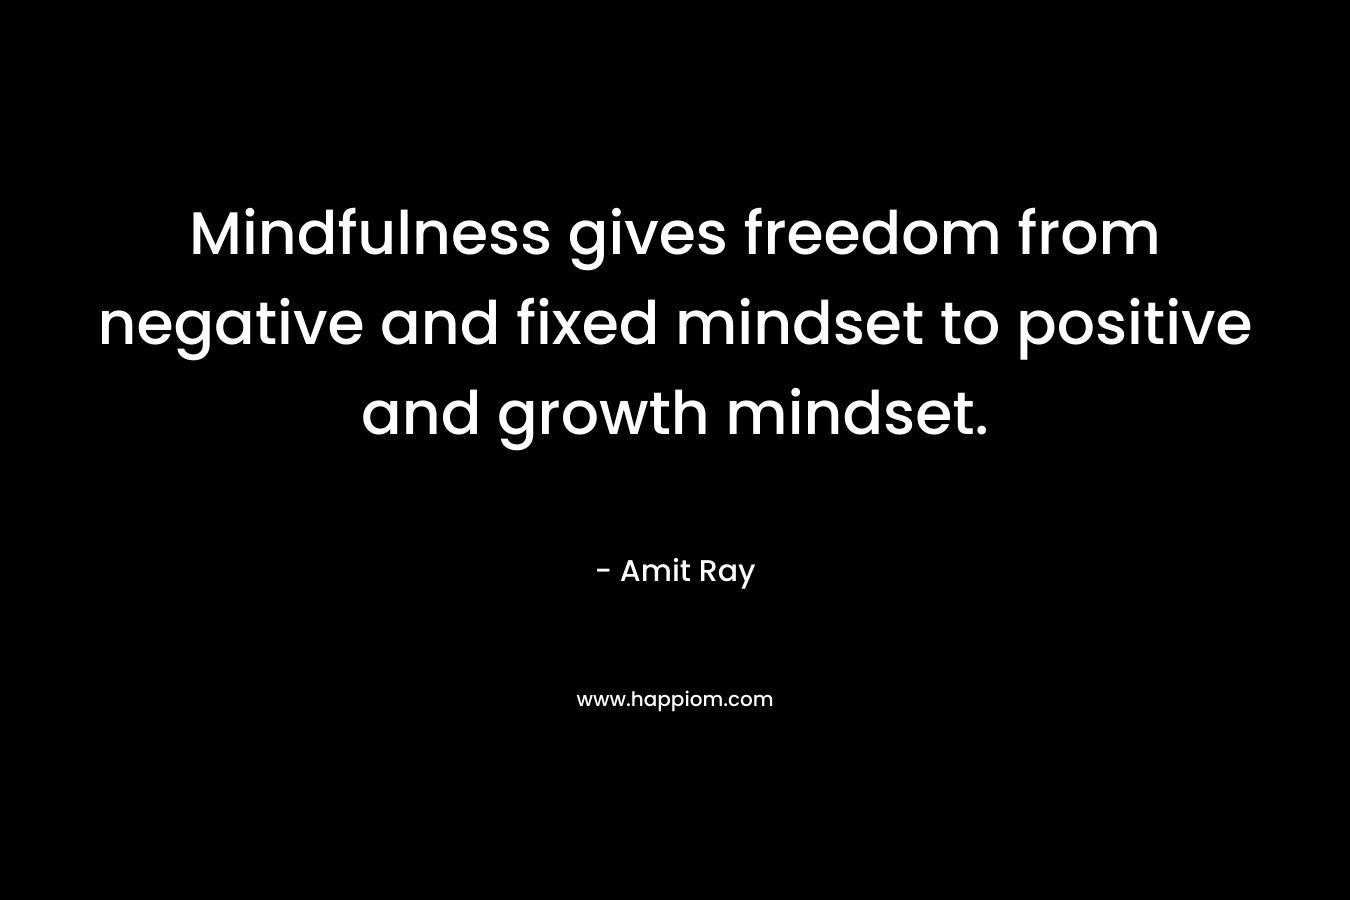 Mindfulness gives freedom from negative and fixed mindset to positive and growth mindset.